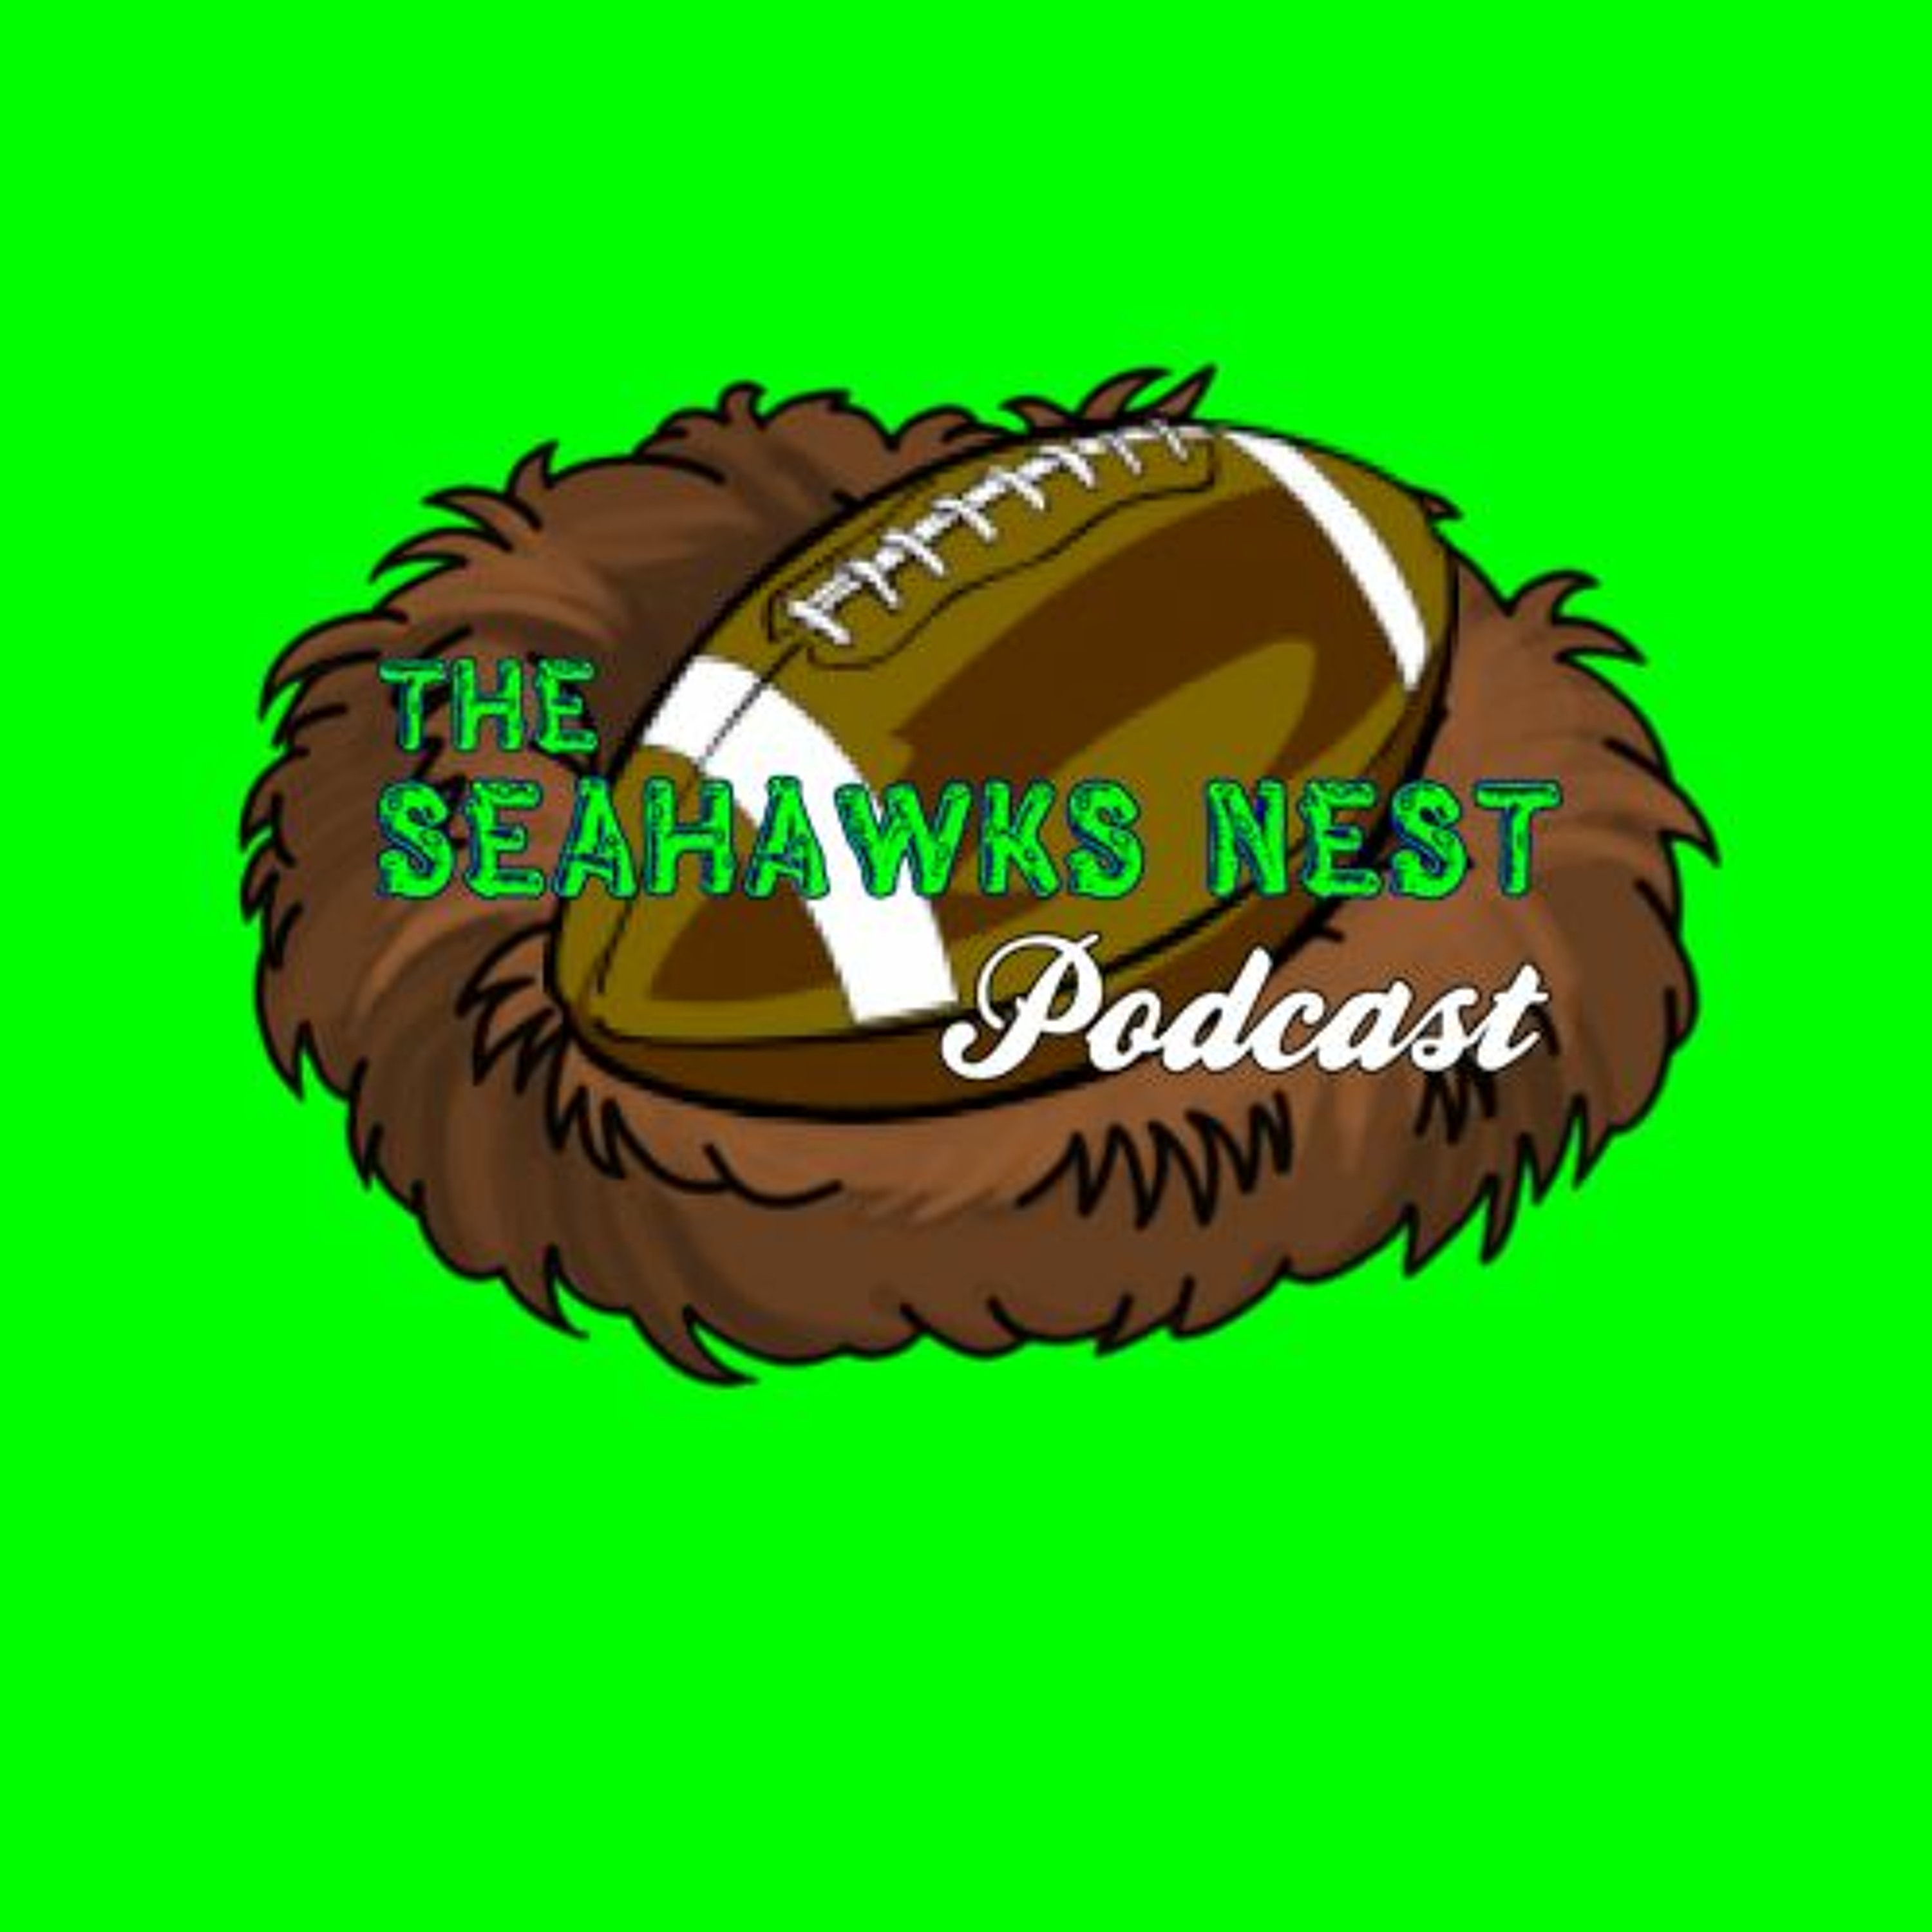 Episode 343 - Seahawks vs the NFC North